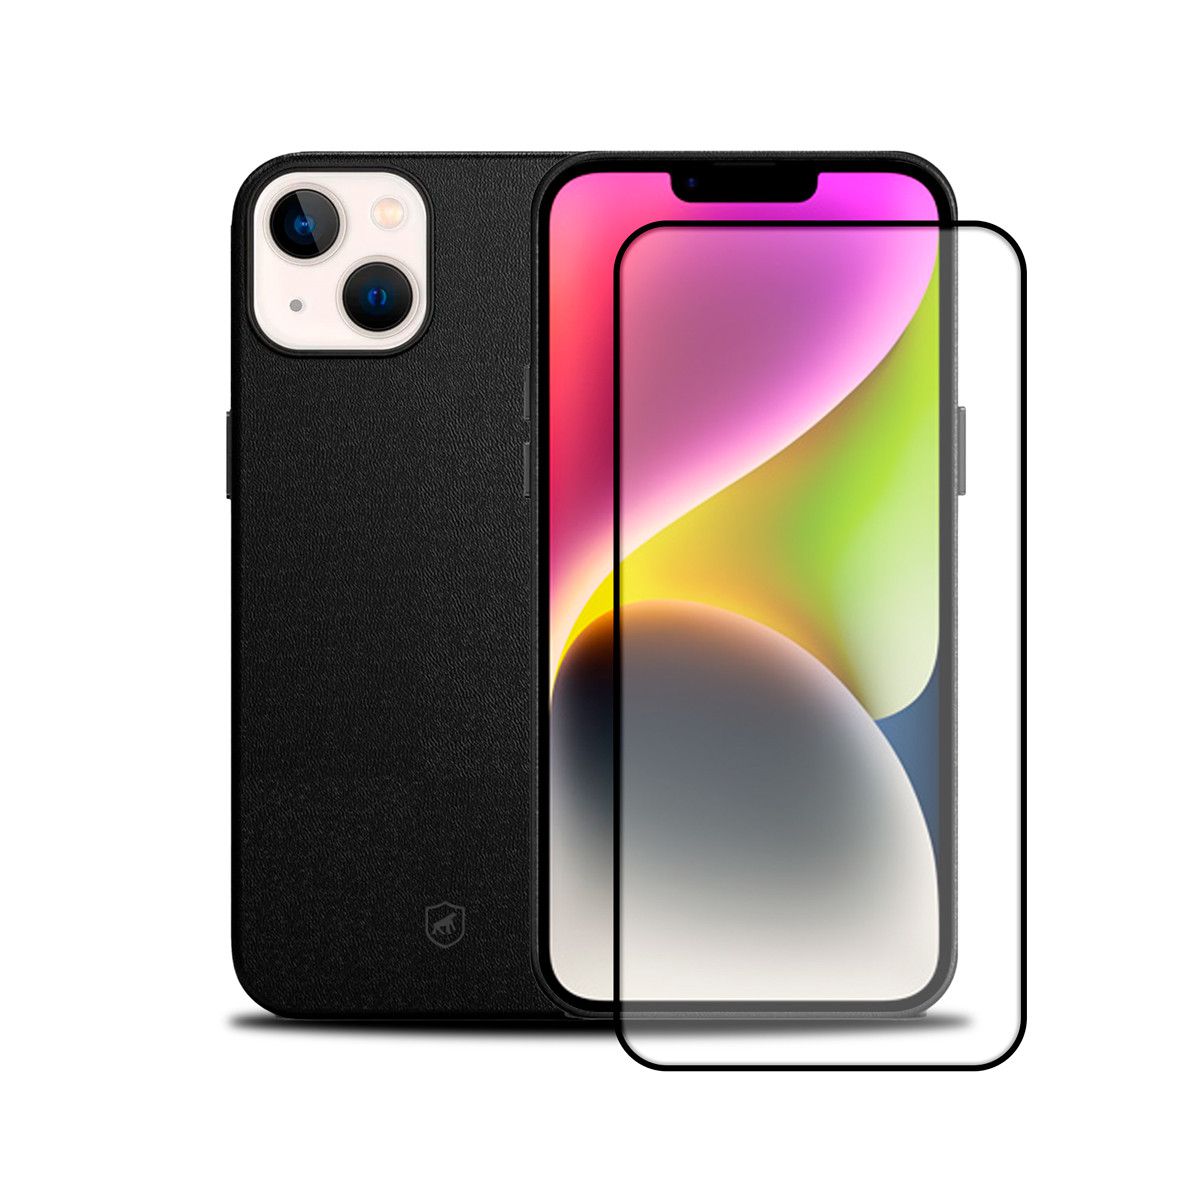 Capa Couro Iphone XR